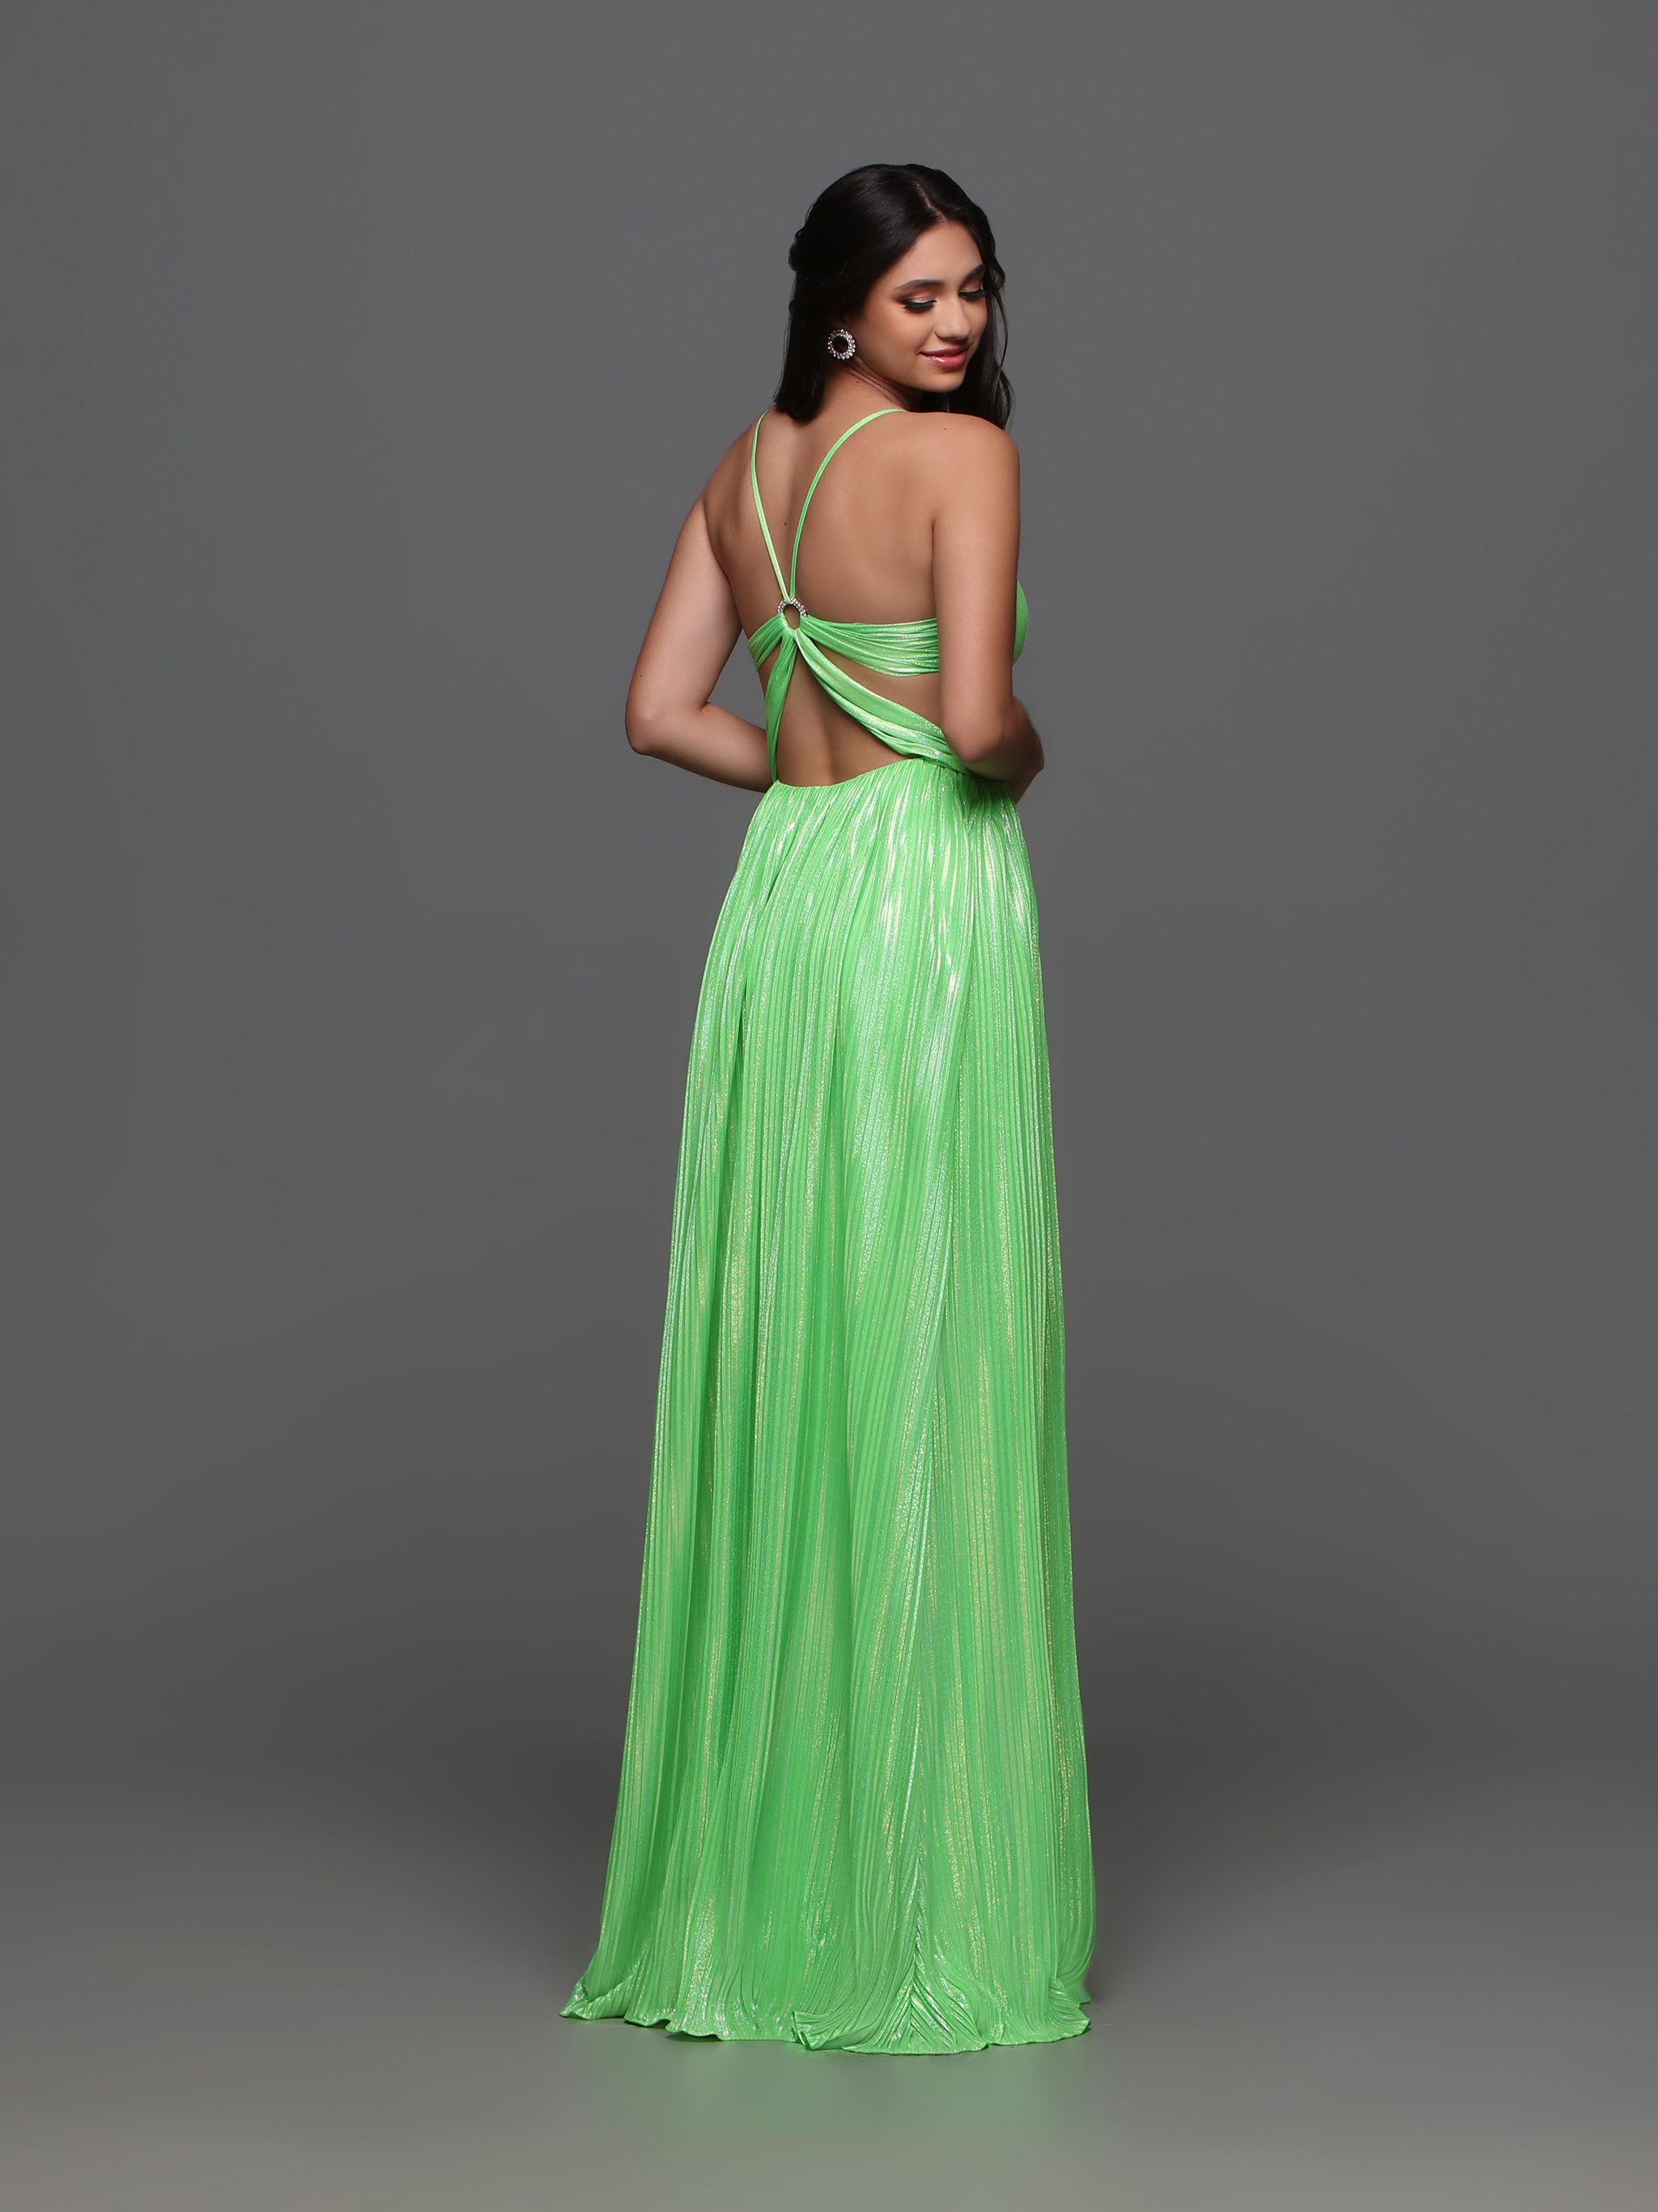 Image showing back view of style #72304